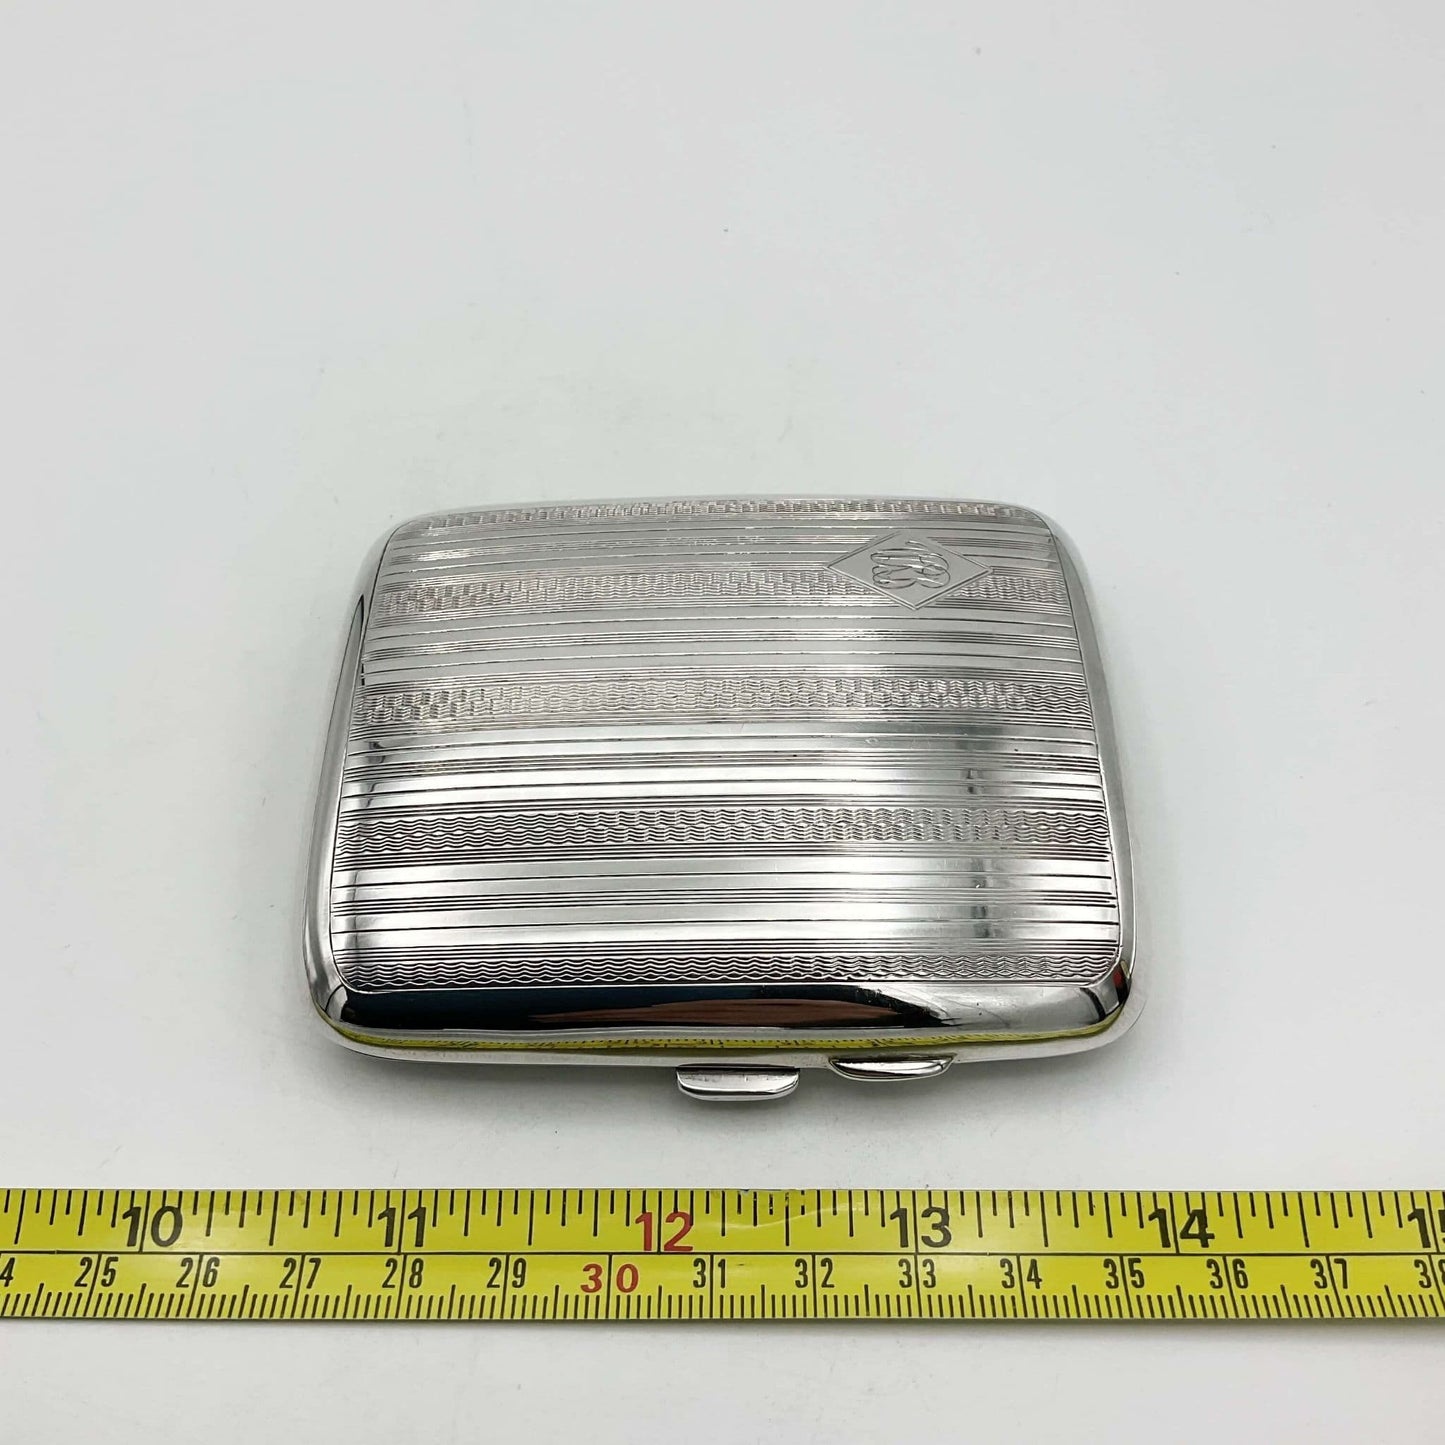 Antique silver cigarette case next to a tape measure showing it's height as 9cm